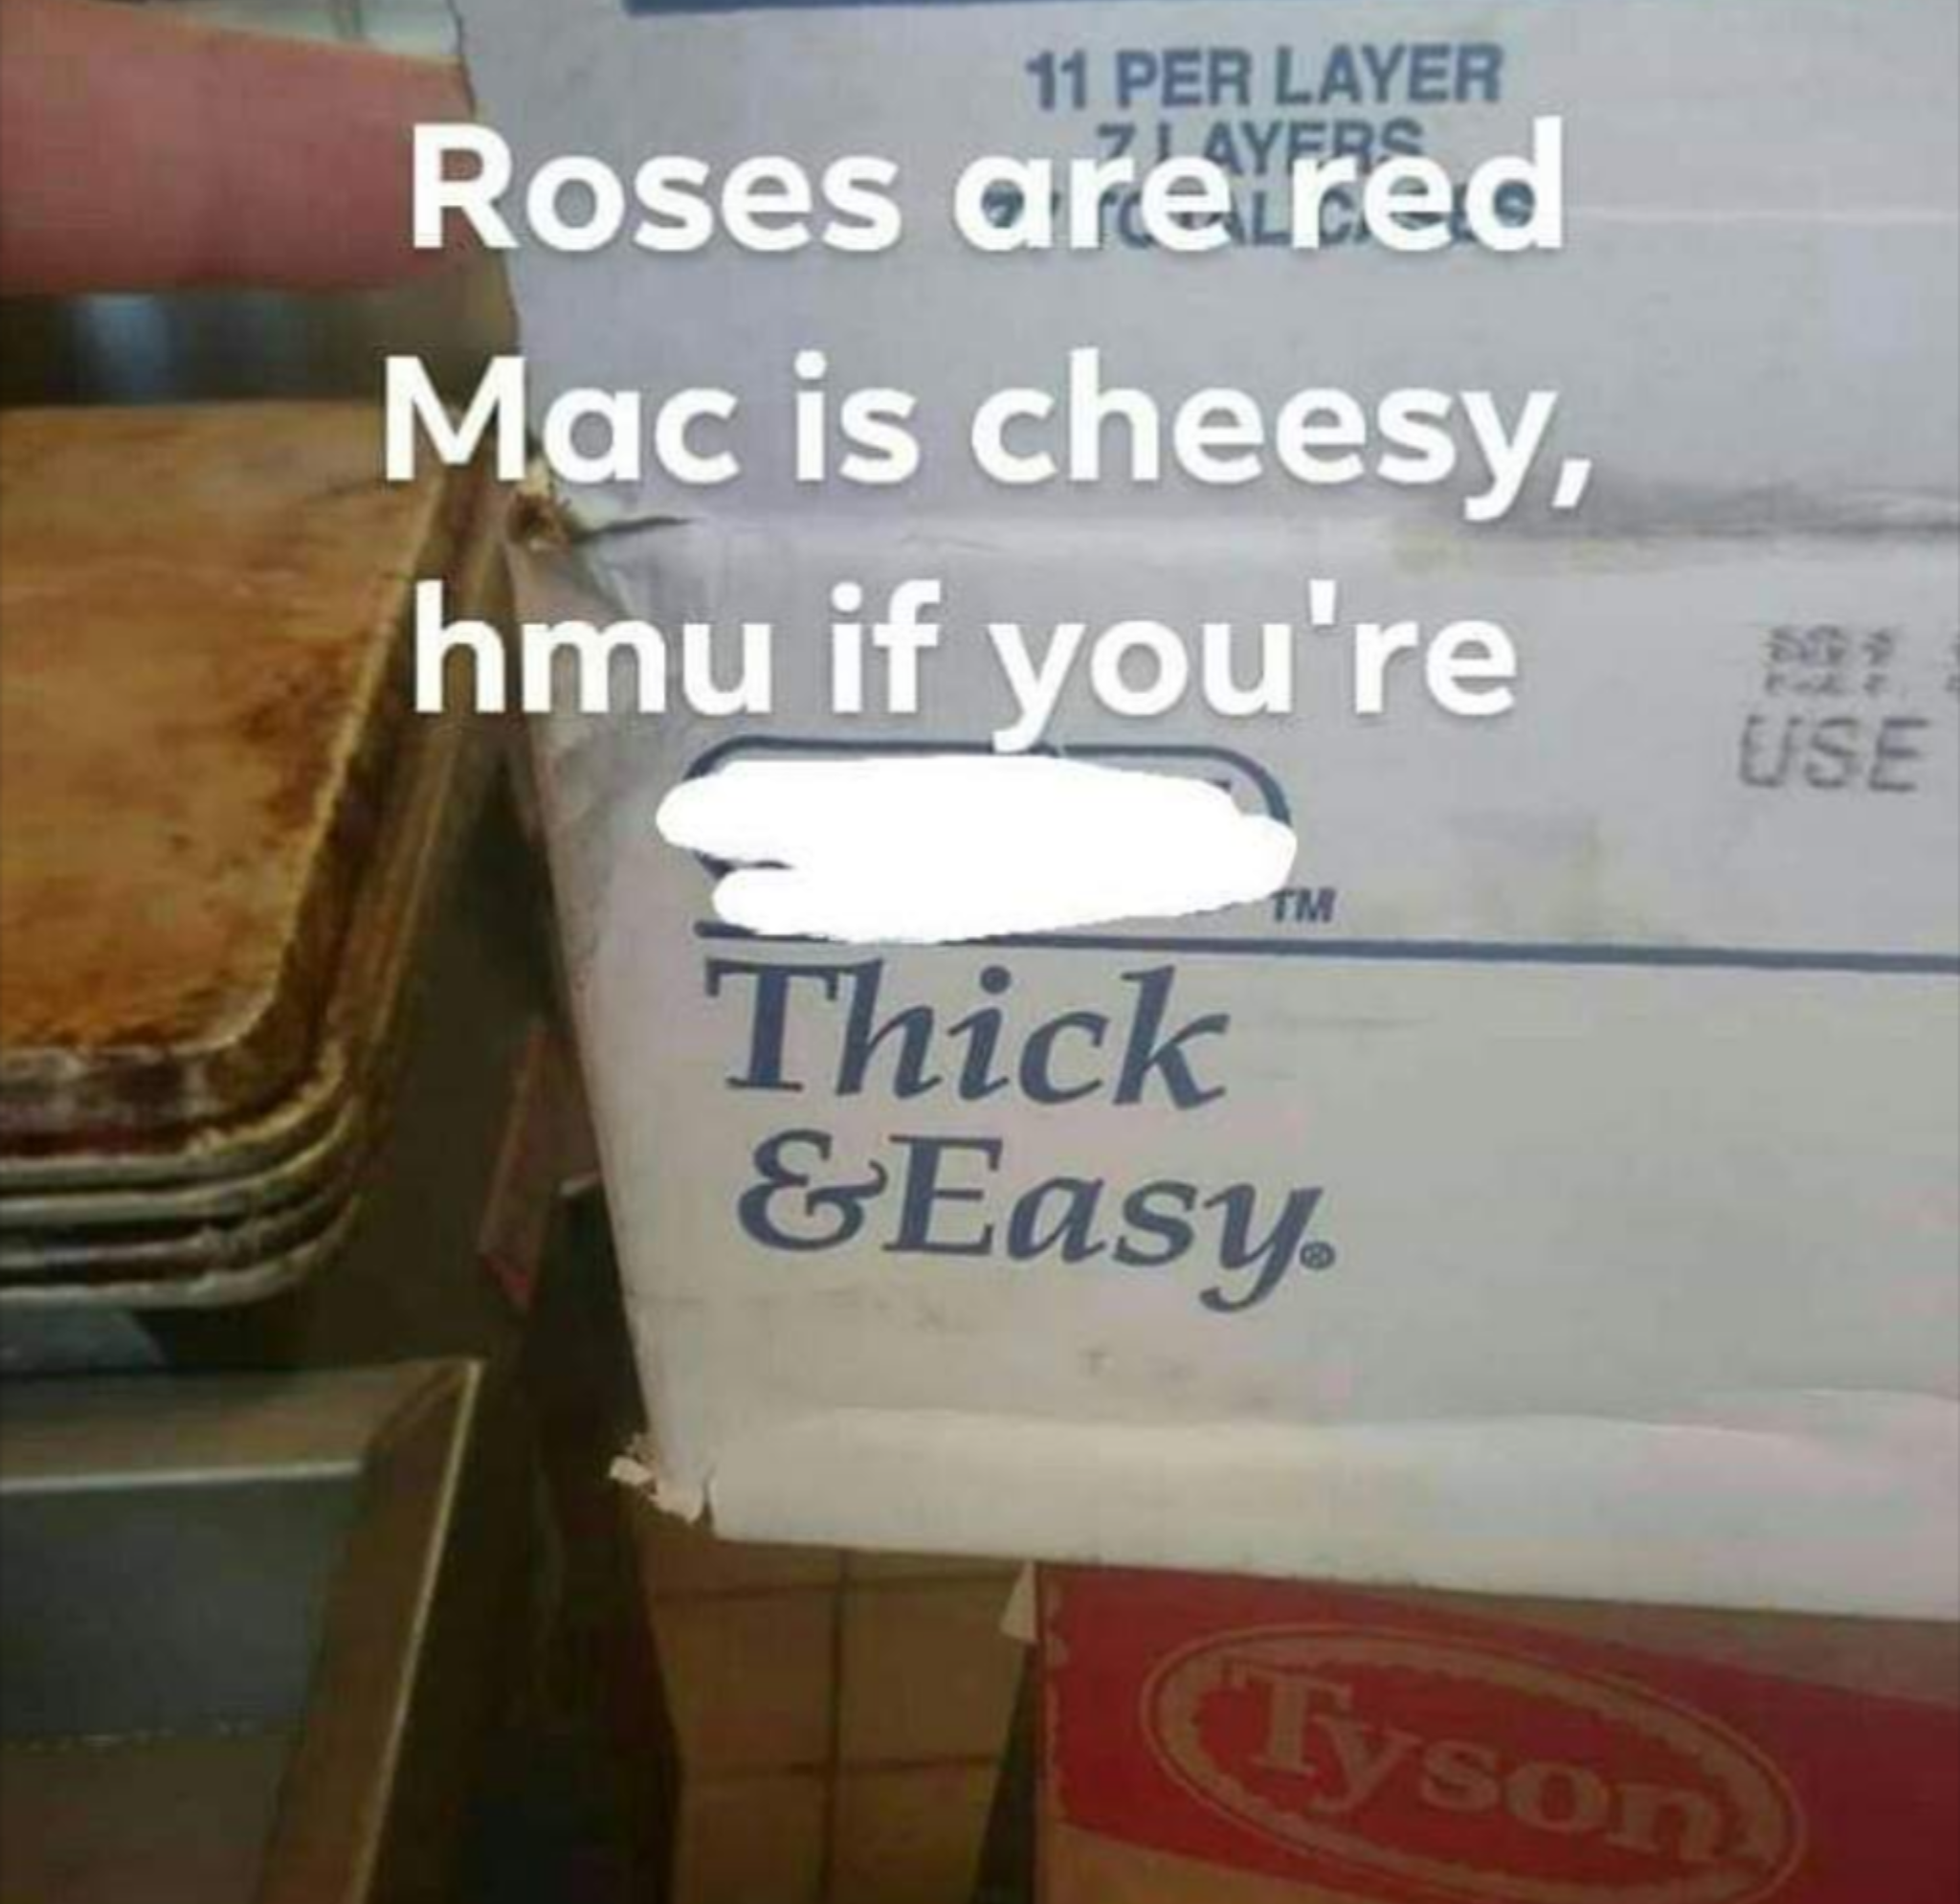 signage - 11 Per Layer Roses are red Mac is cheesy, hmu if you're on Use Thick &Easy Tyson